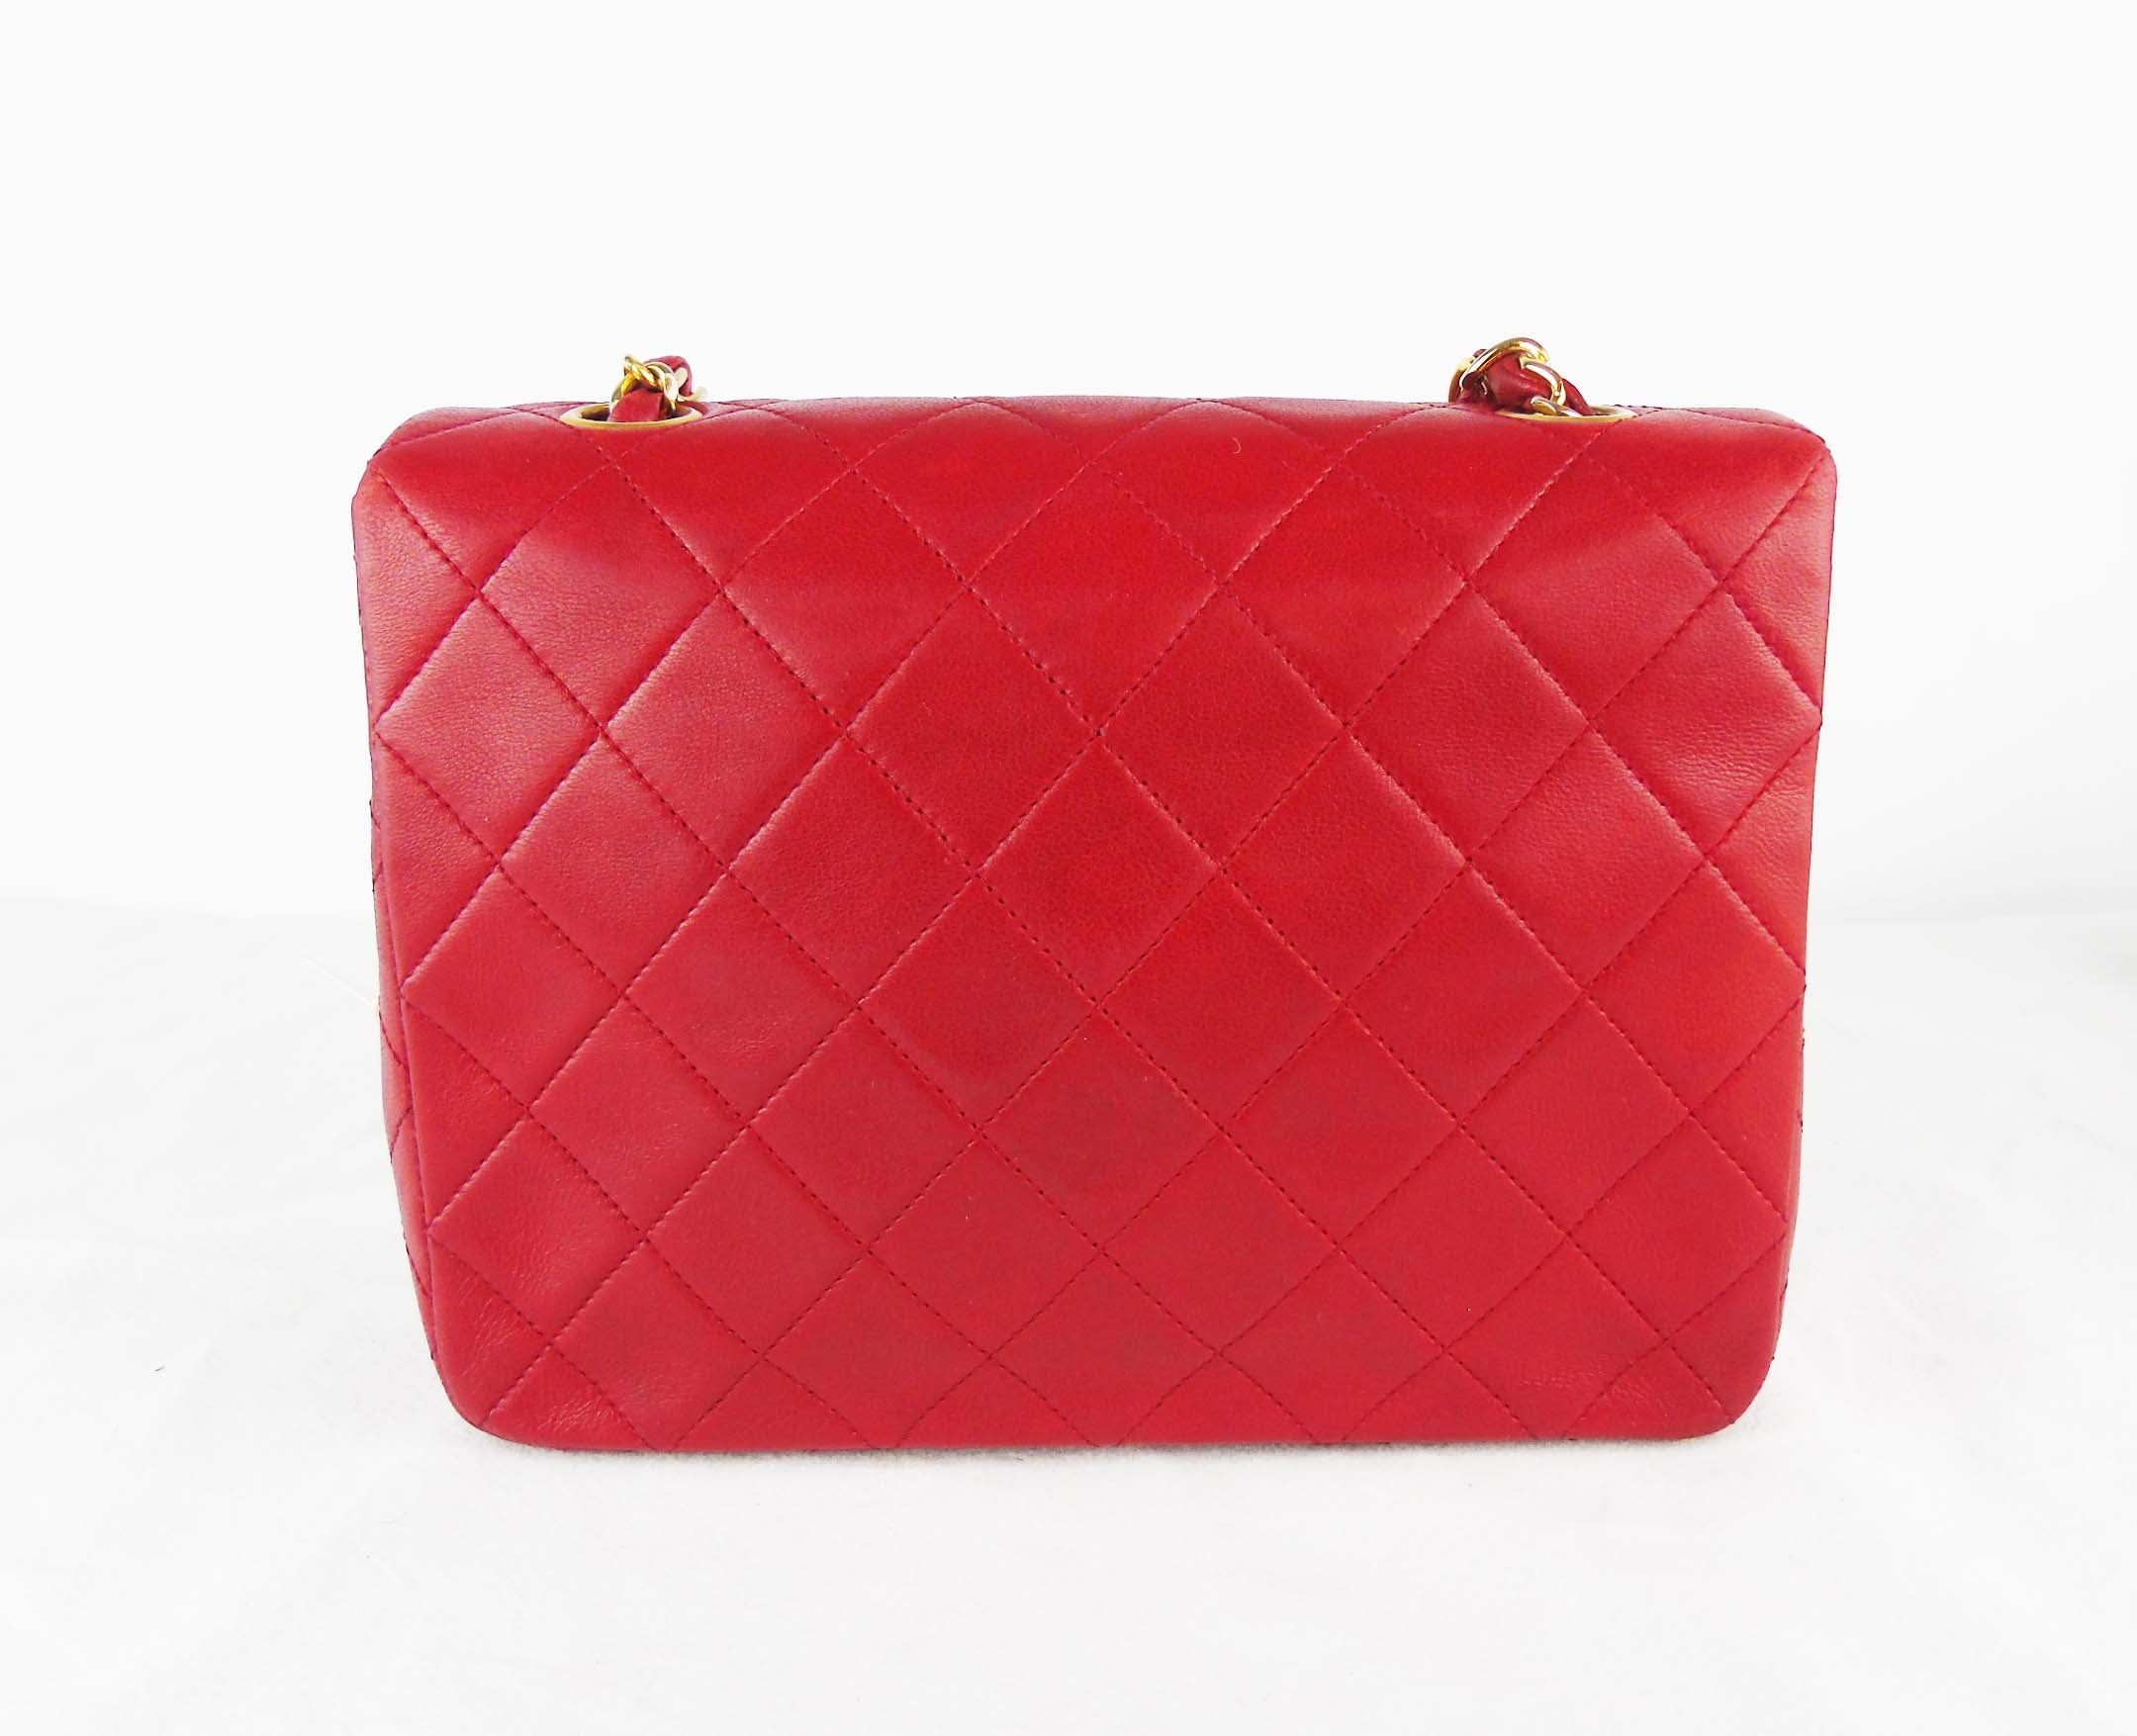 Chanel Small Pink Trendy CC Flap Bag